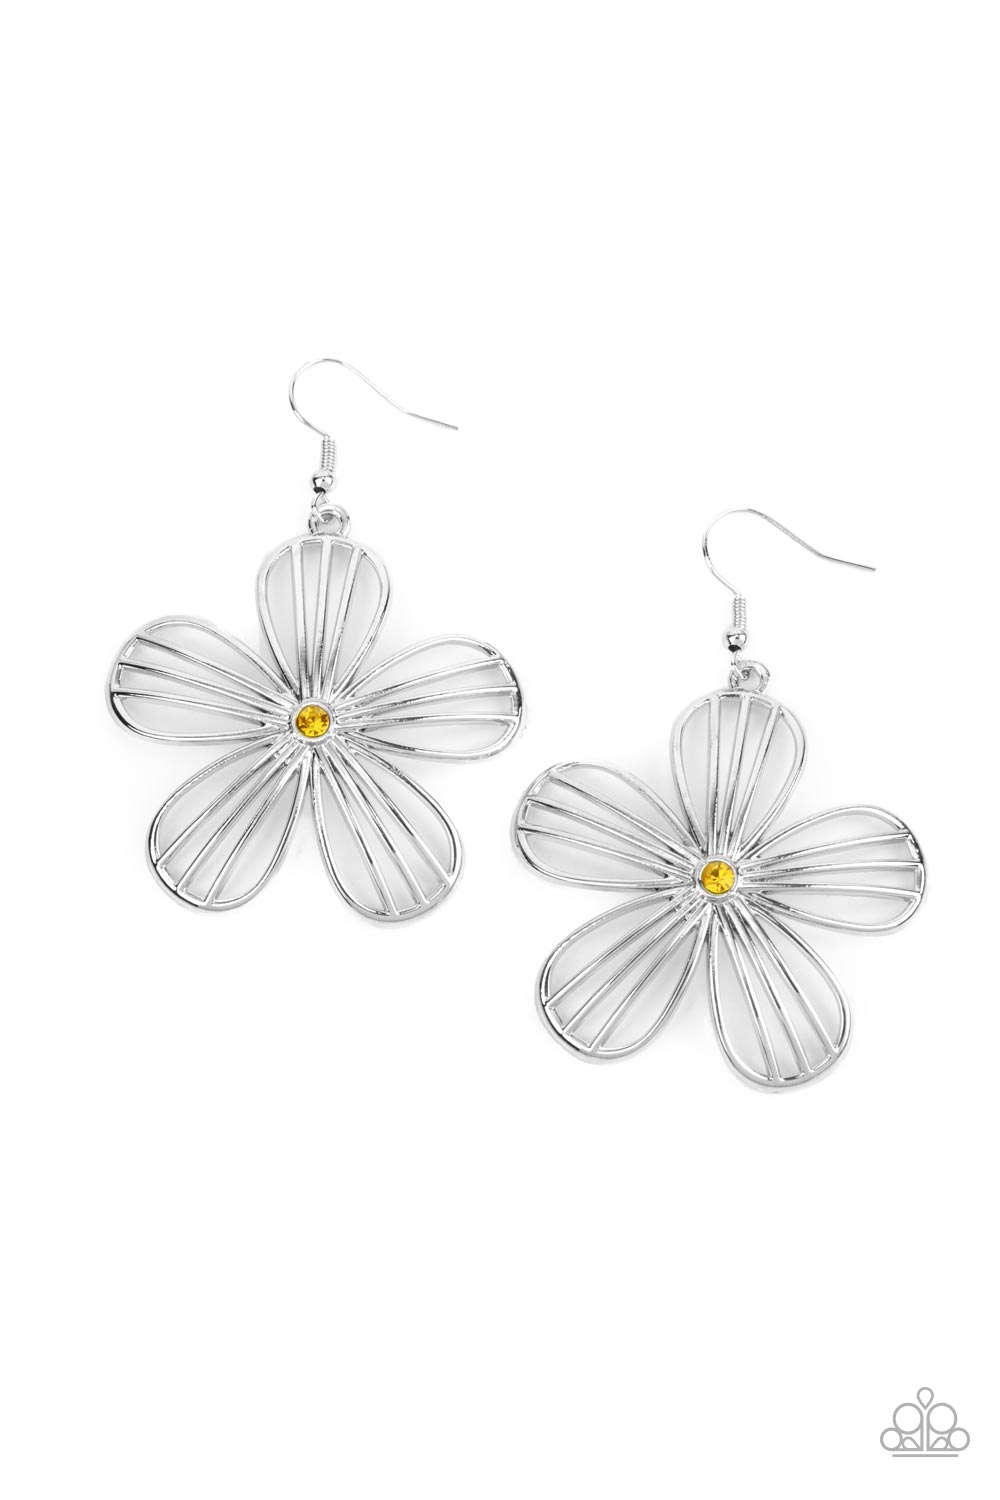 Meadow Musical Yellow Rhinestone and Silver Flower Earrings - Paparazzi Accessories - lightbox -CarasShop.com - $5 Jewelry by Cara Jewels